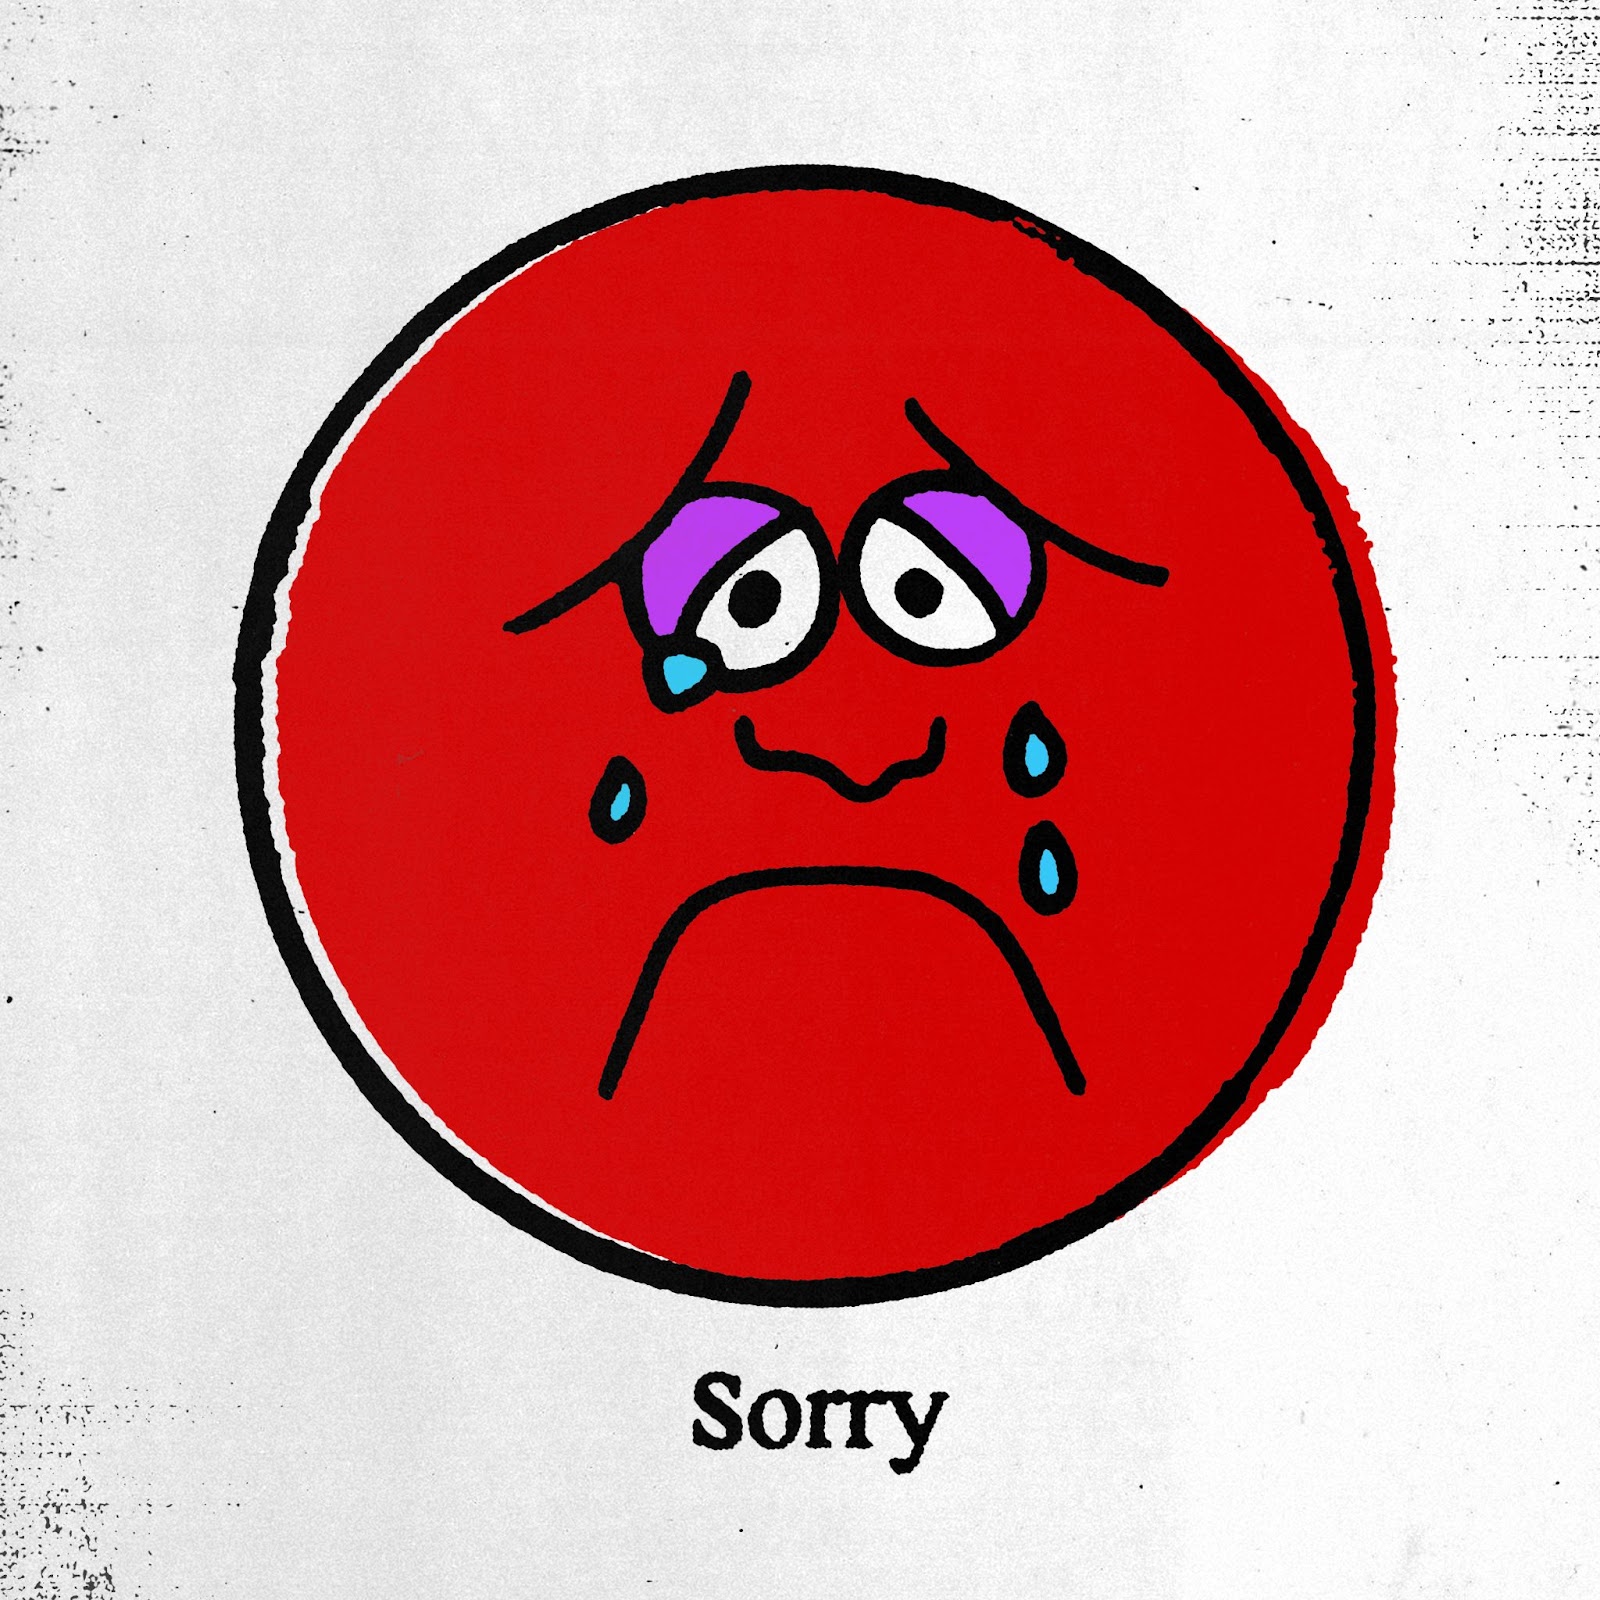 an illustration of a round, red face, frowning and crying